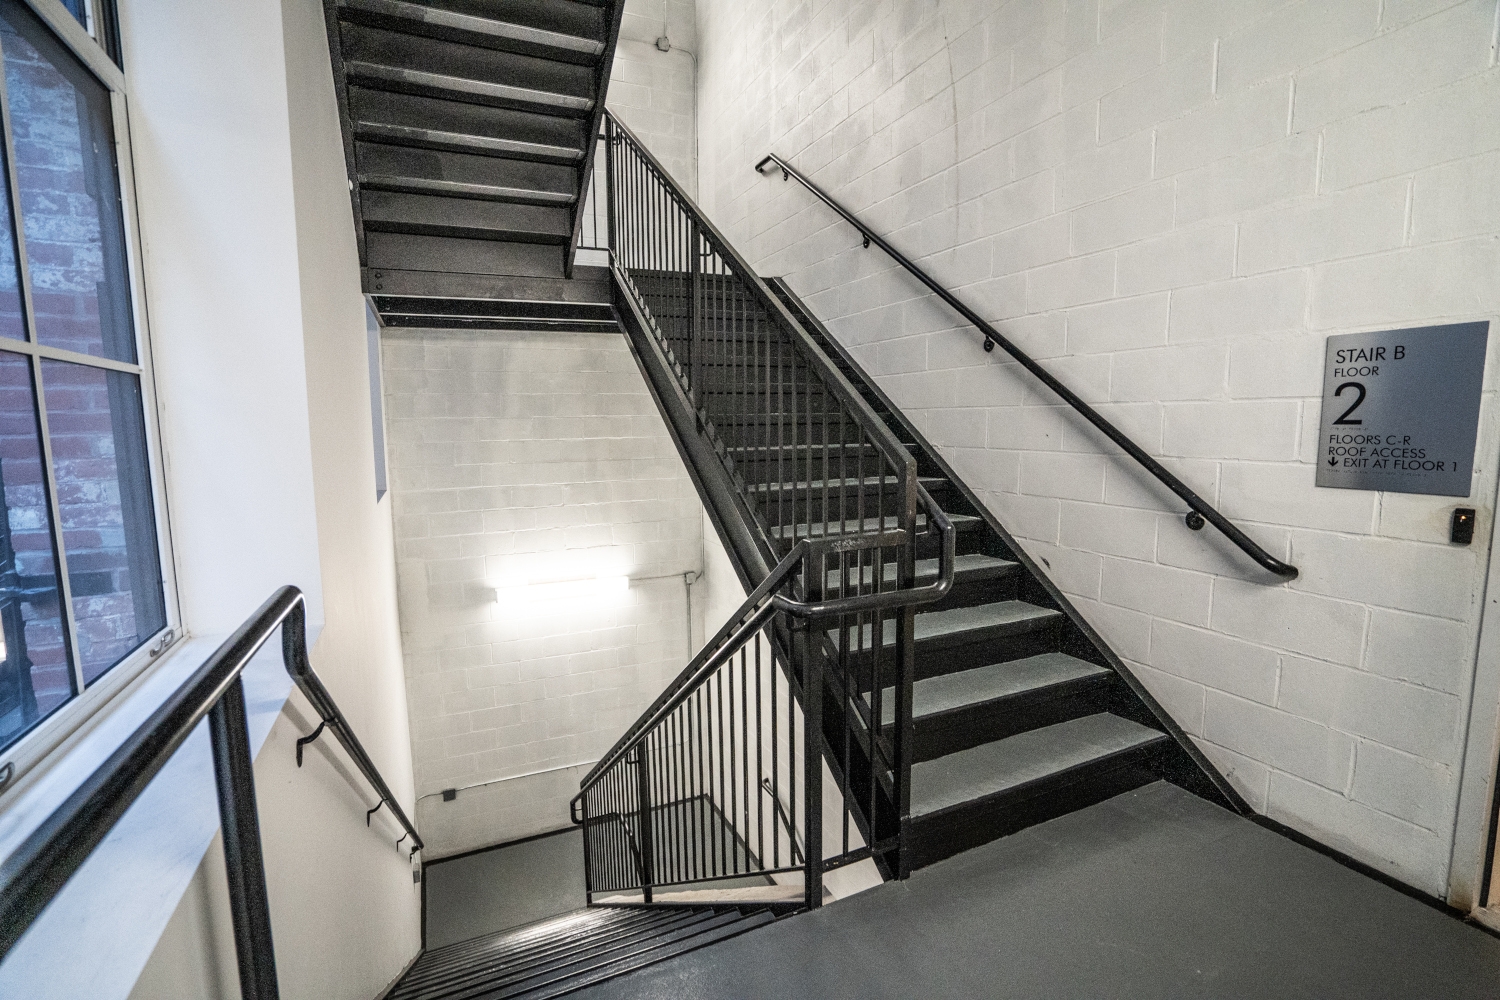 New CMU stair-shaft with metal stairs and railings, showcasing ironworks and metal craftsmanship